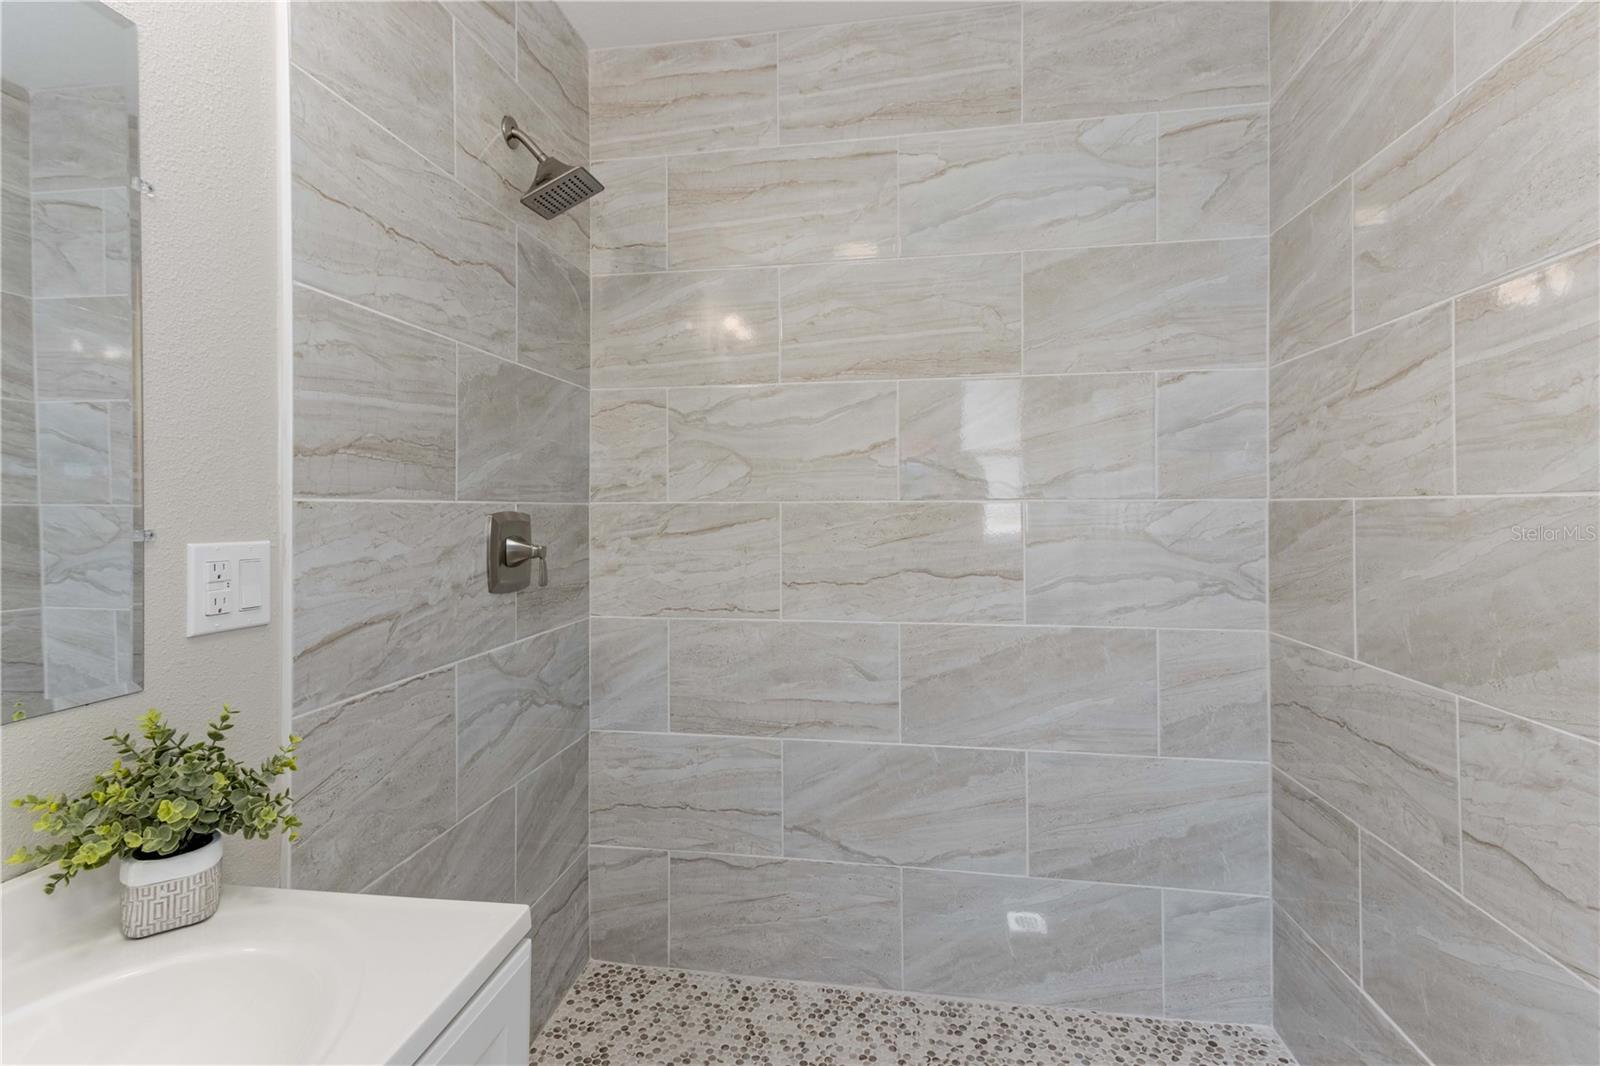 Large, open shower